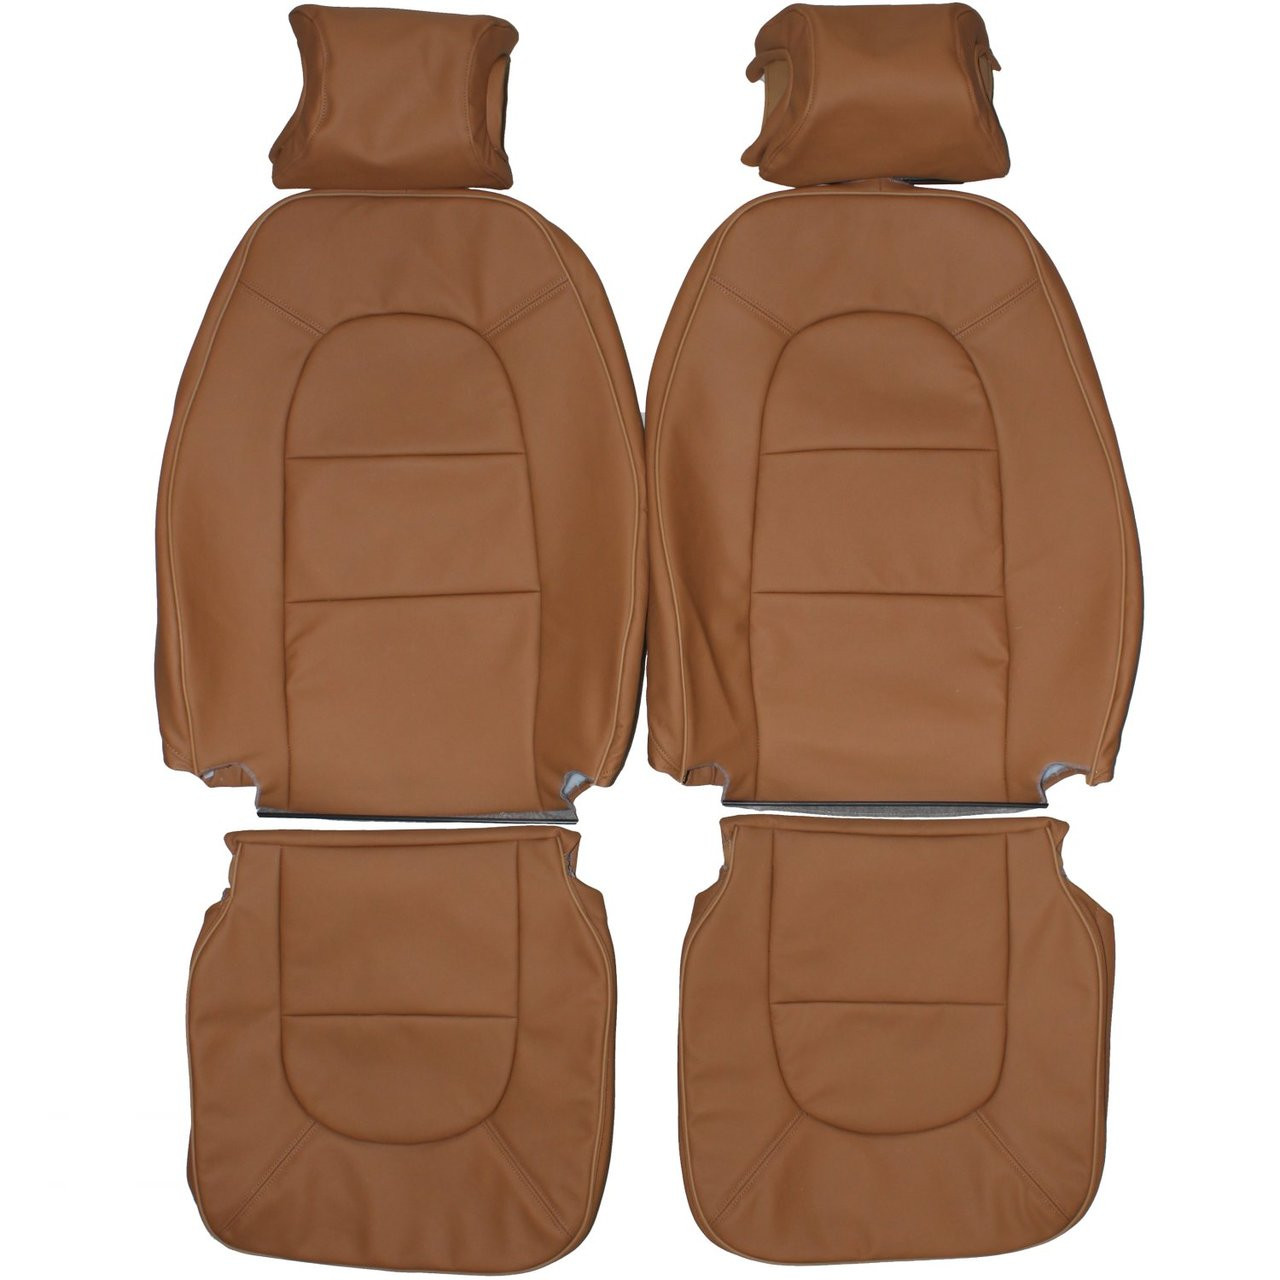 1990-1993 Saab 900 Convertible Custom Real Leather Seat Covers (Front) -  Lseat.com